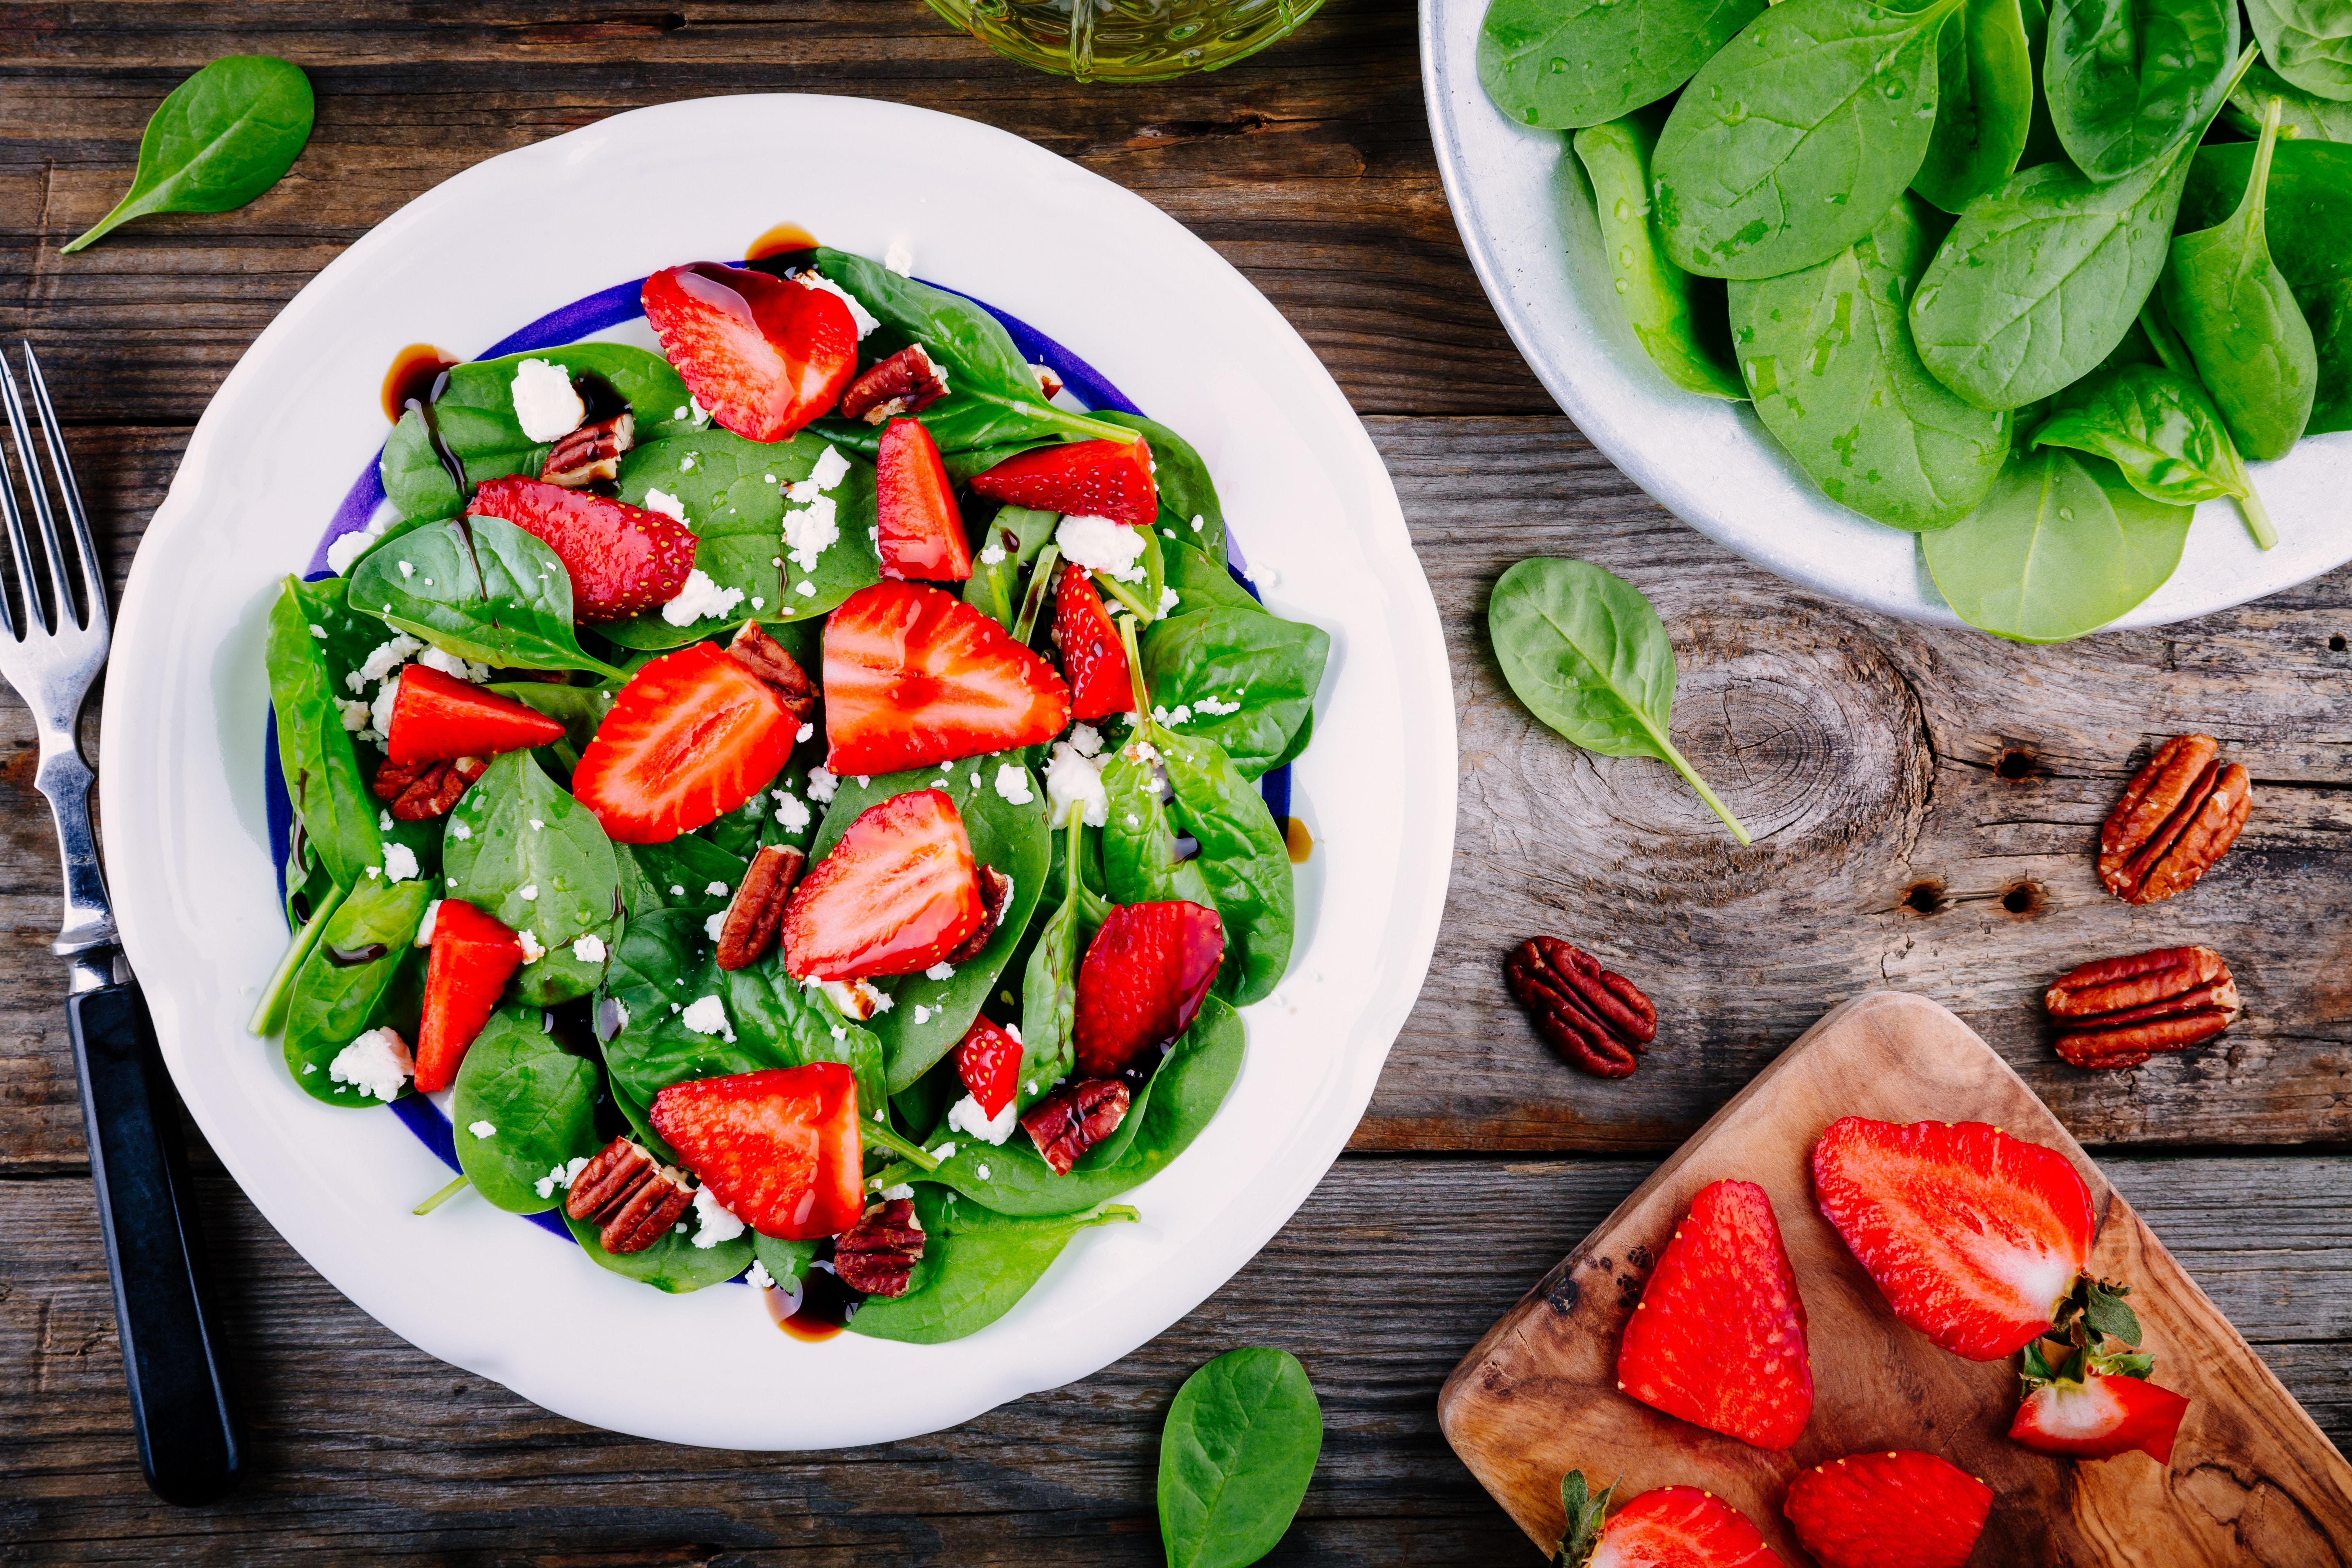 Spinach salad with strawberries, feta cheese, balsamic and pecan nuts on wooden background